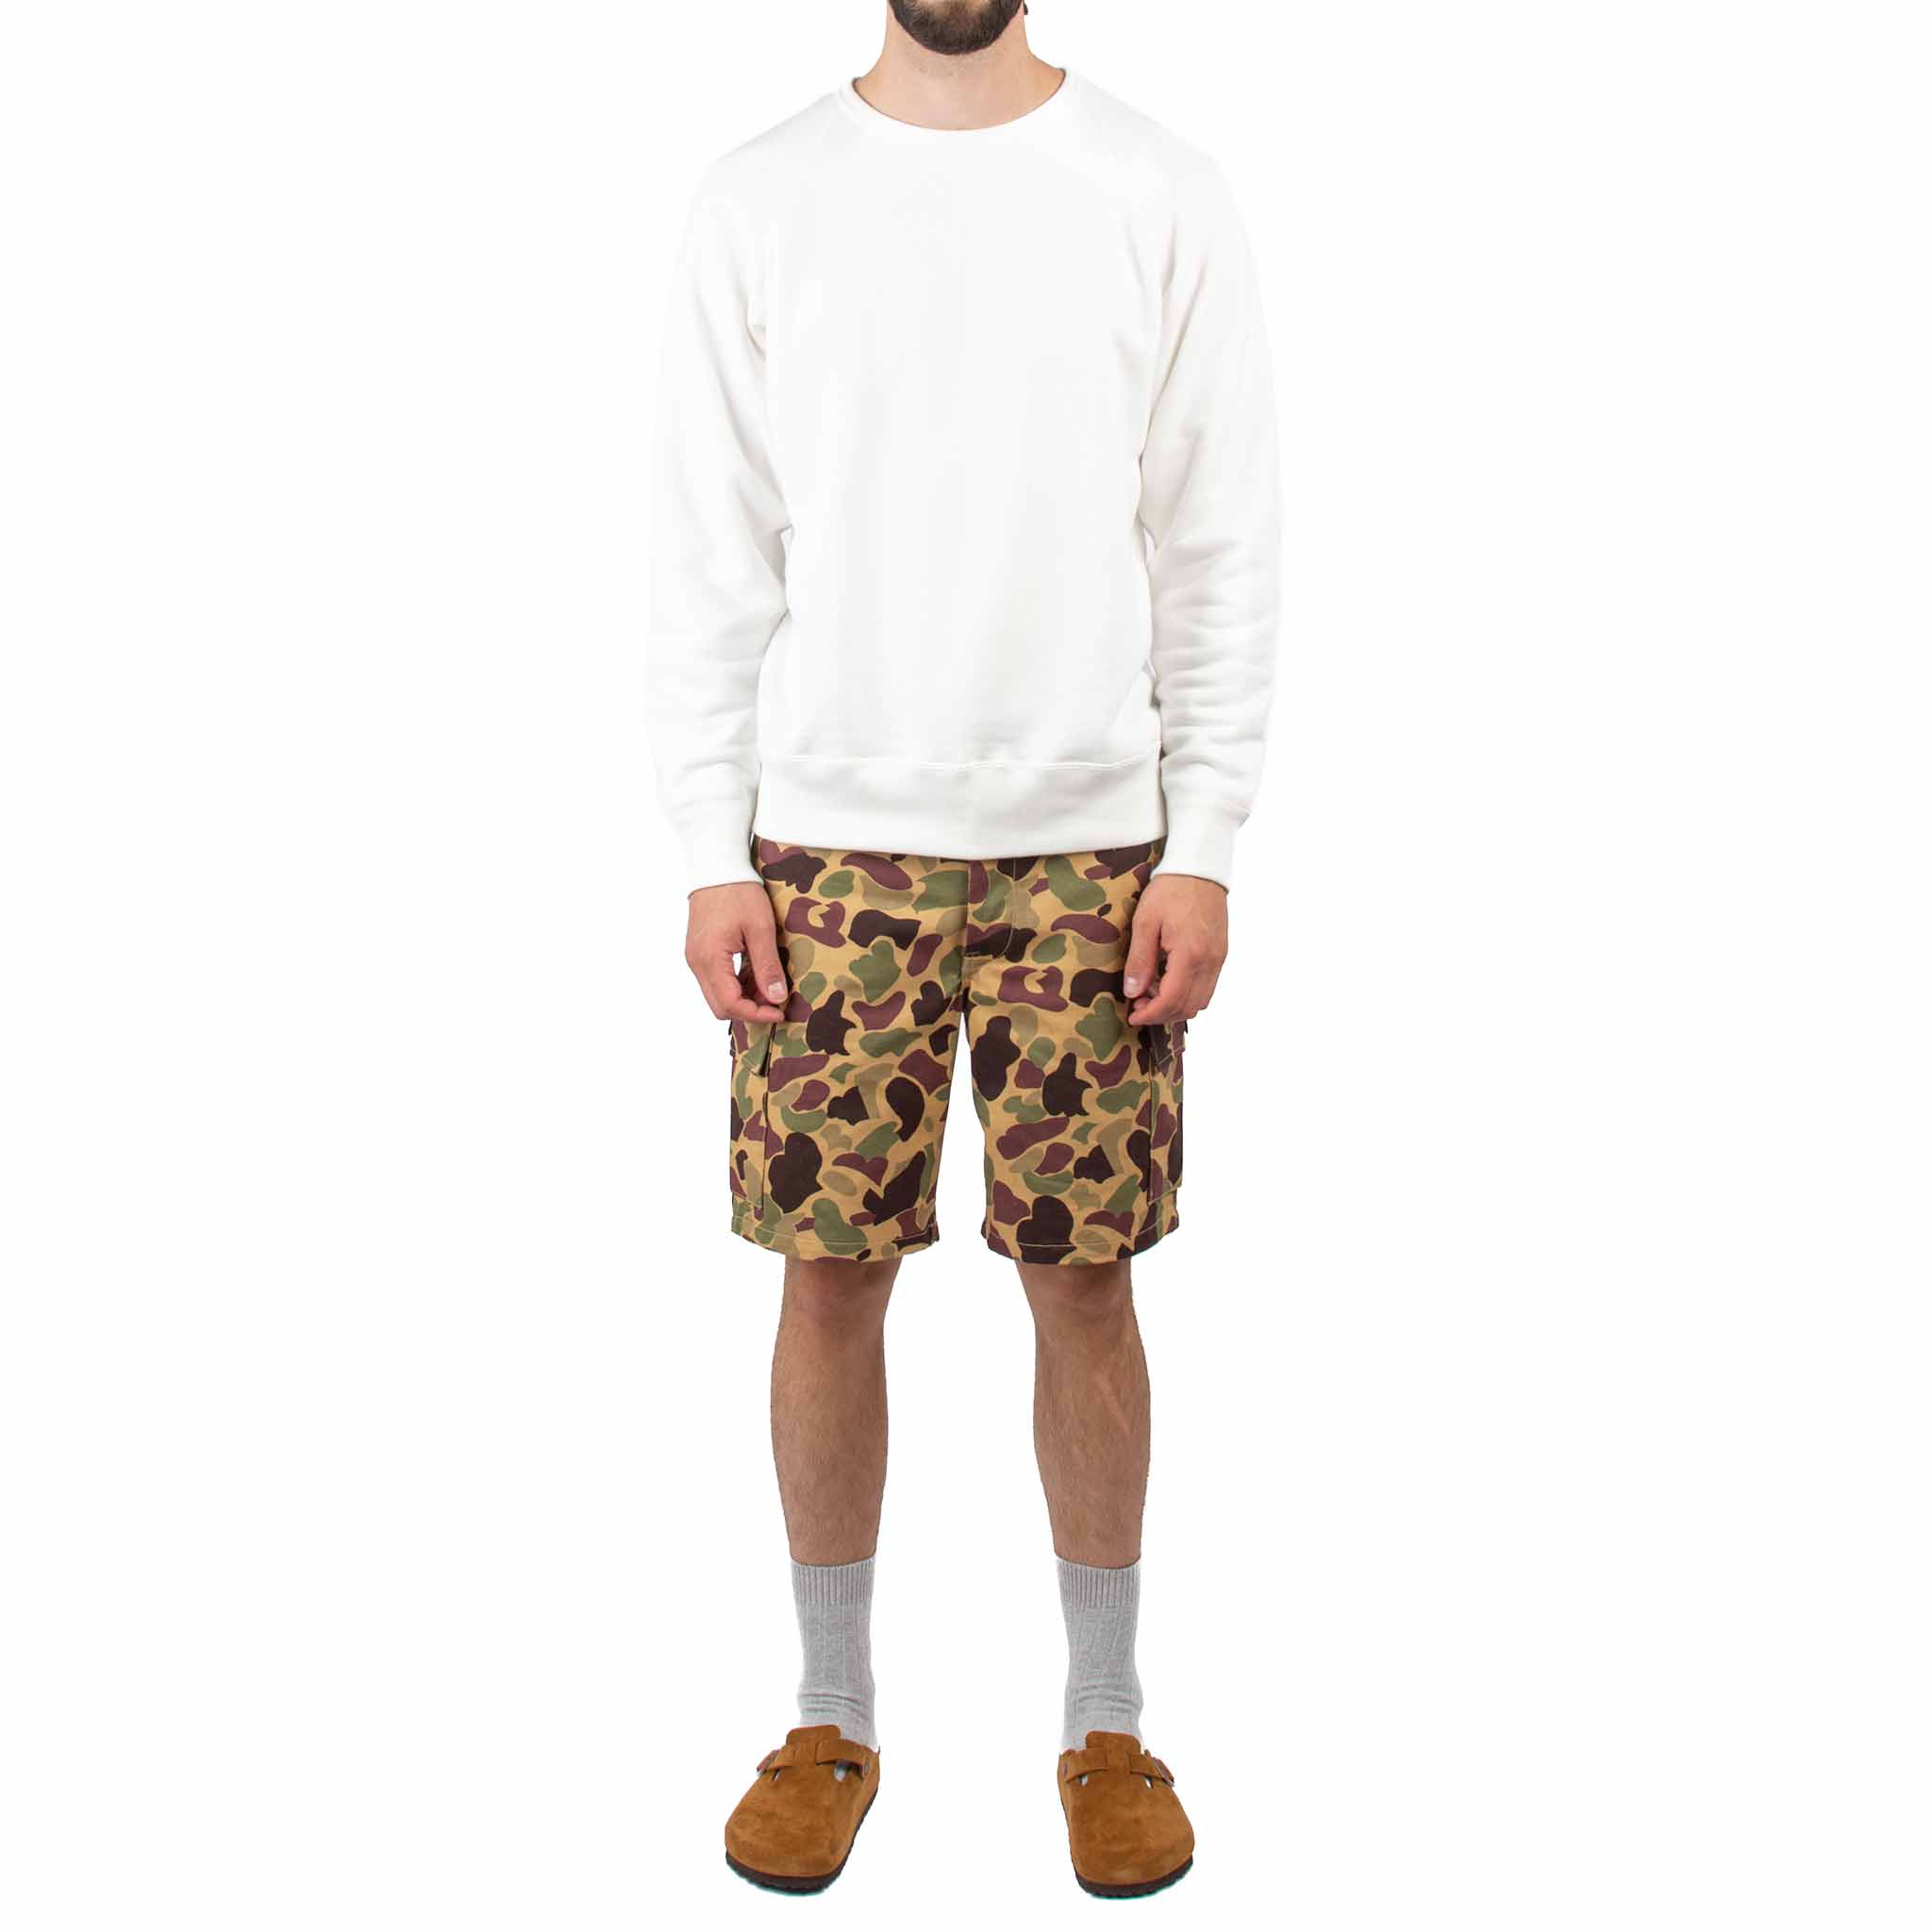 The Real McCoy's MP21006 Beo Gam Camouflage Shorts Beige Model